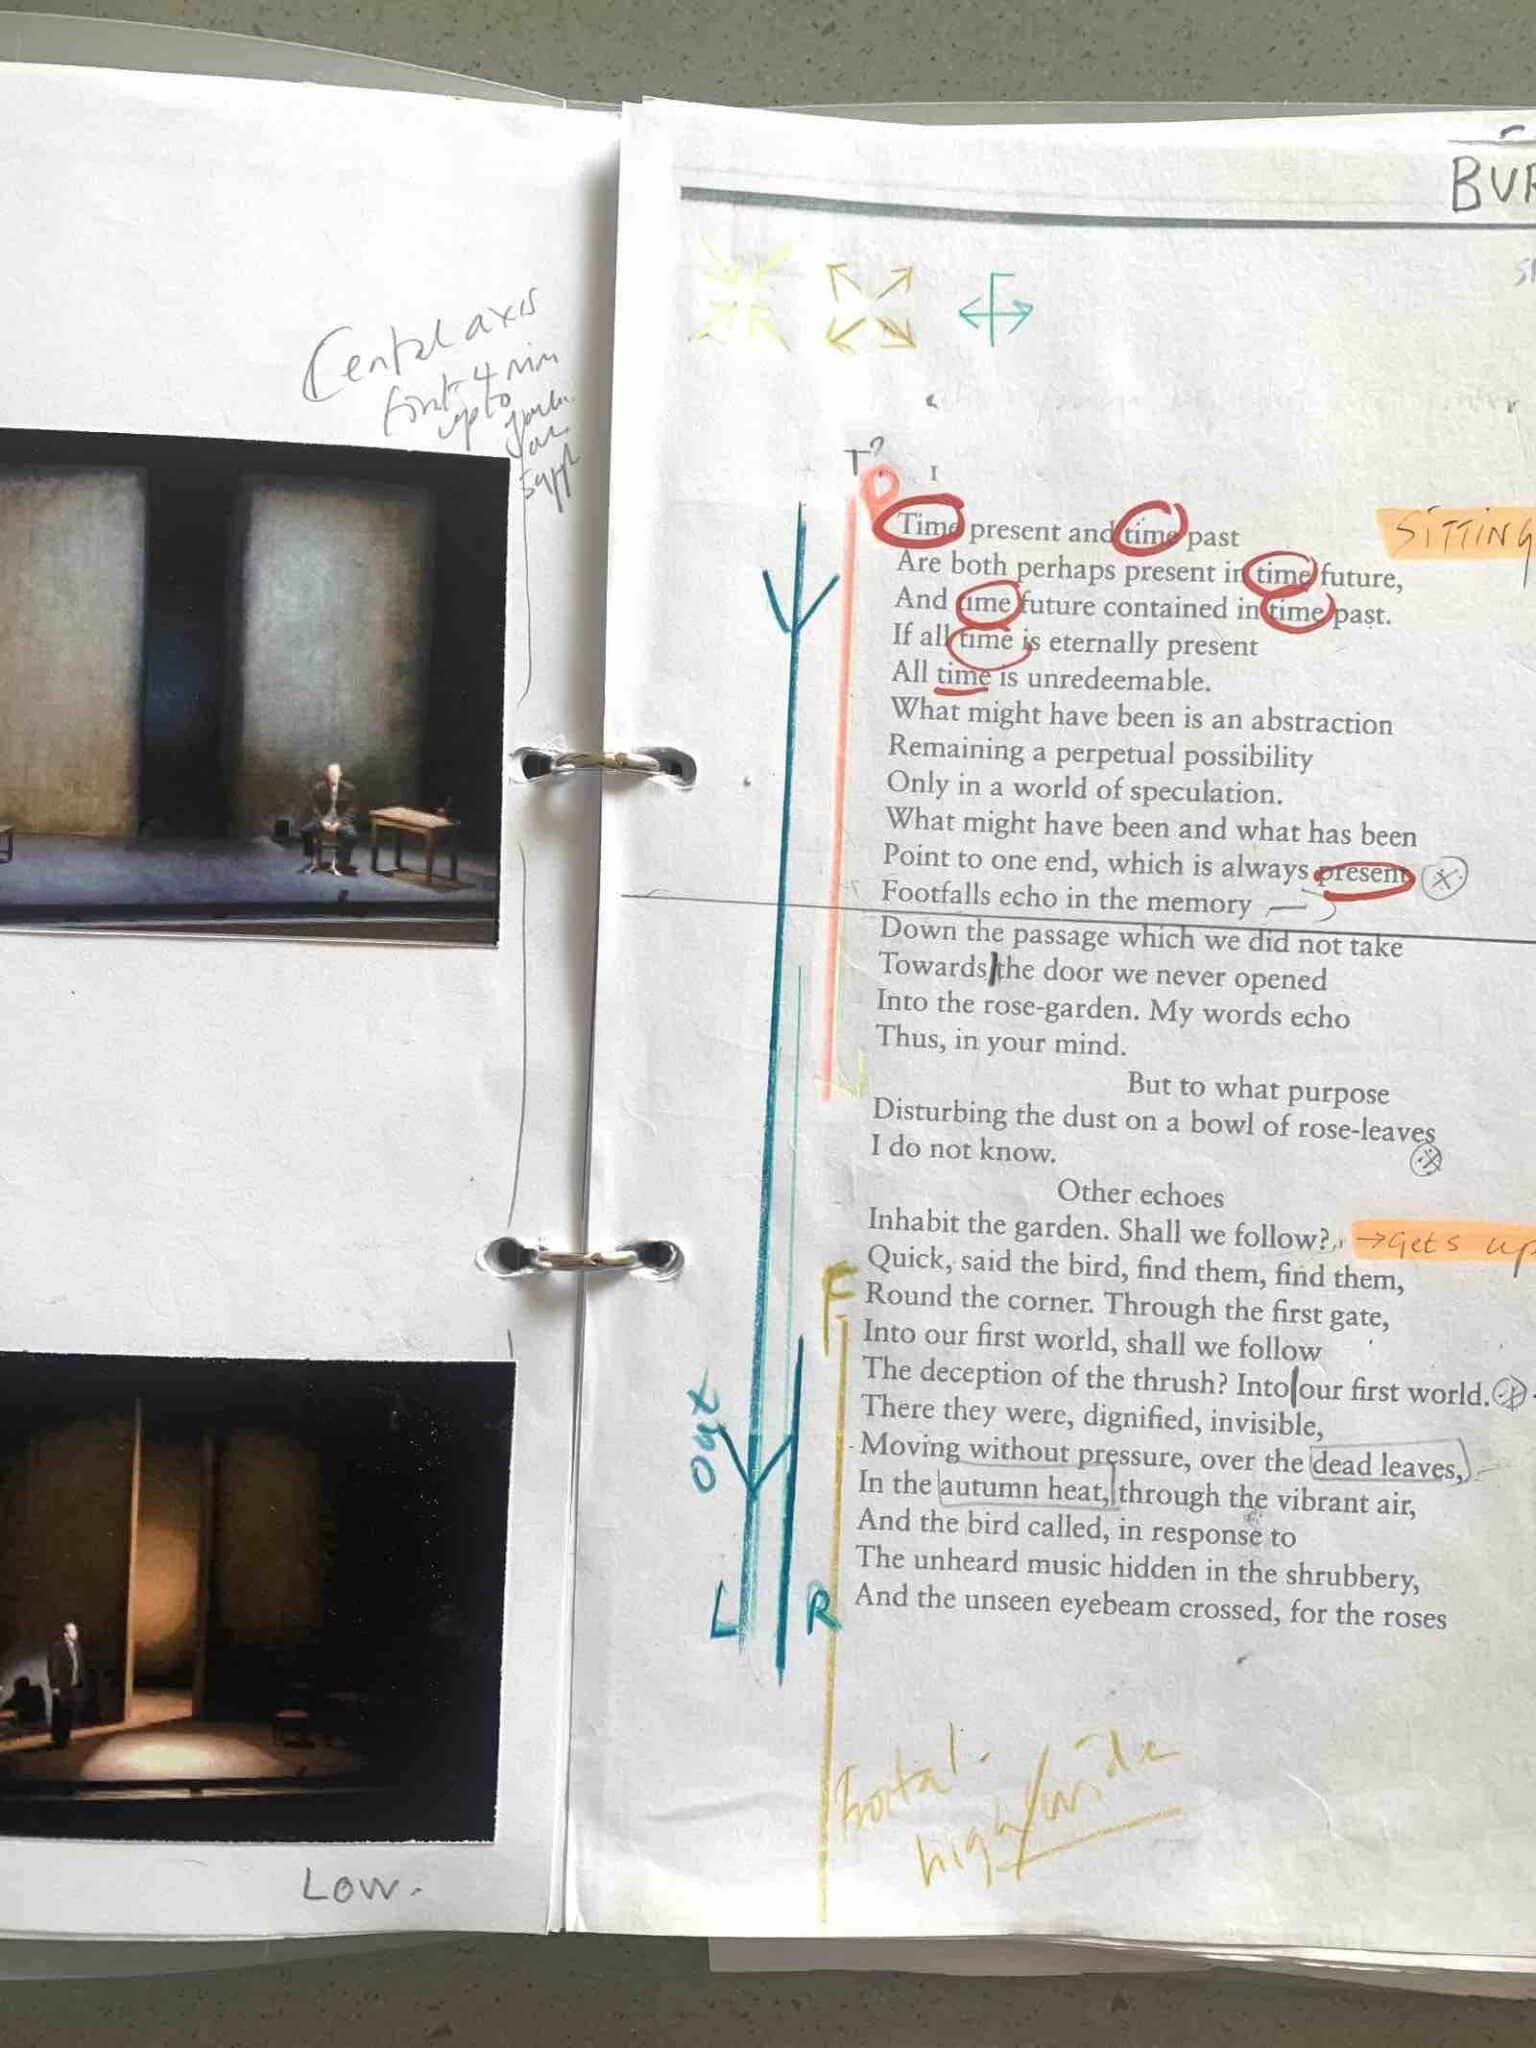 An excerpt from the director's script for The Four Quartets, courtesy of Sophie Fiennes, who is interviewed on the podcast. Left: still images of the stage and Ralph Fiennes. Right: a passage from the East Coker Quartet is marked up with information on lighting, blocking, and camera choices.